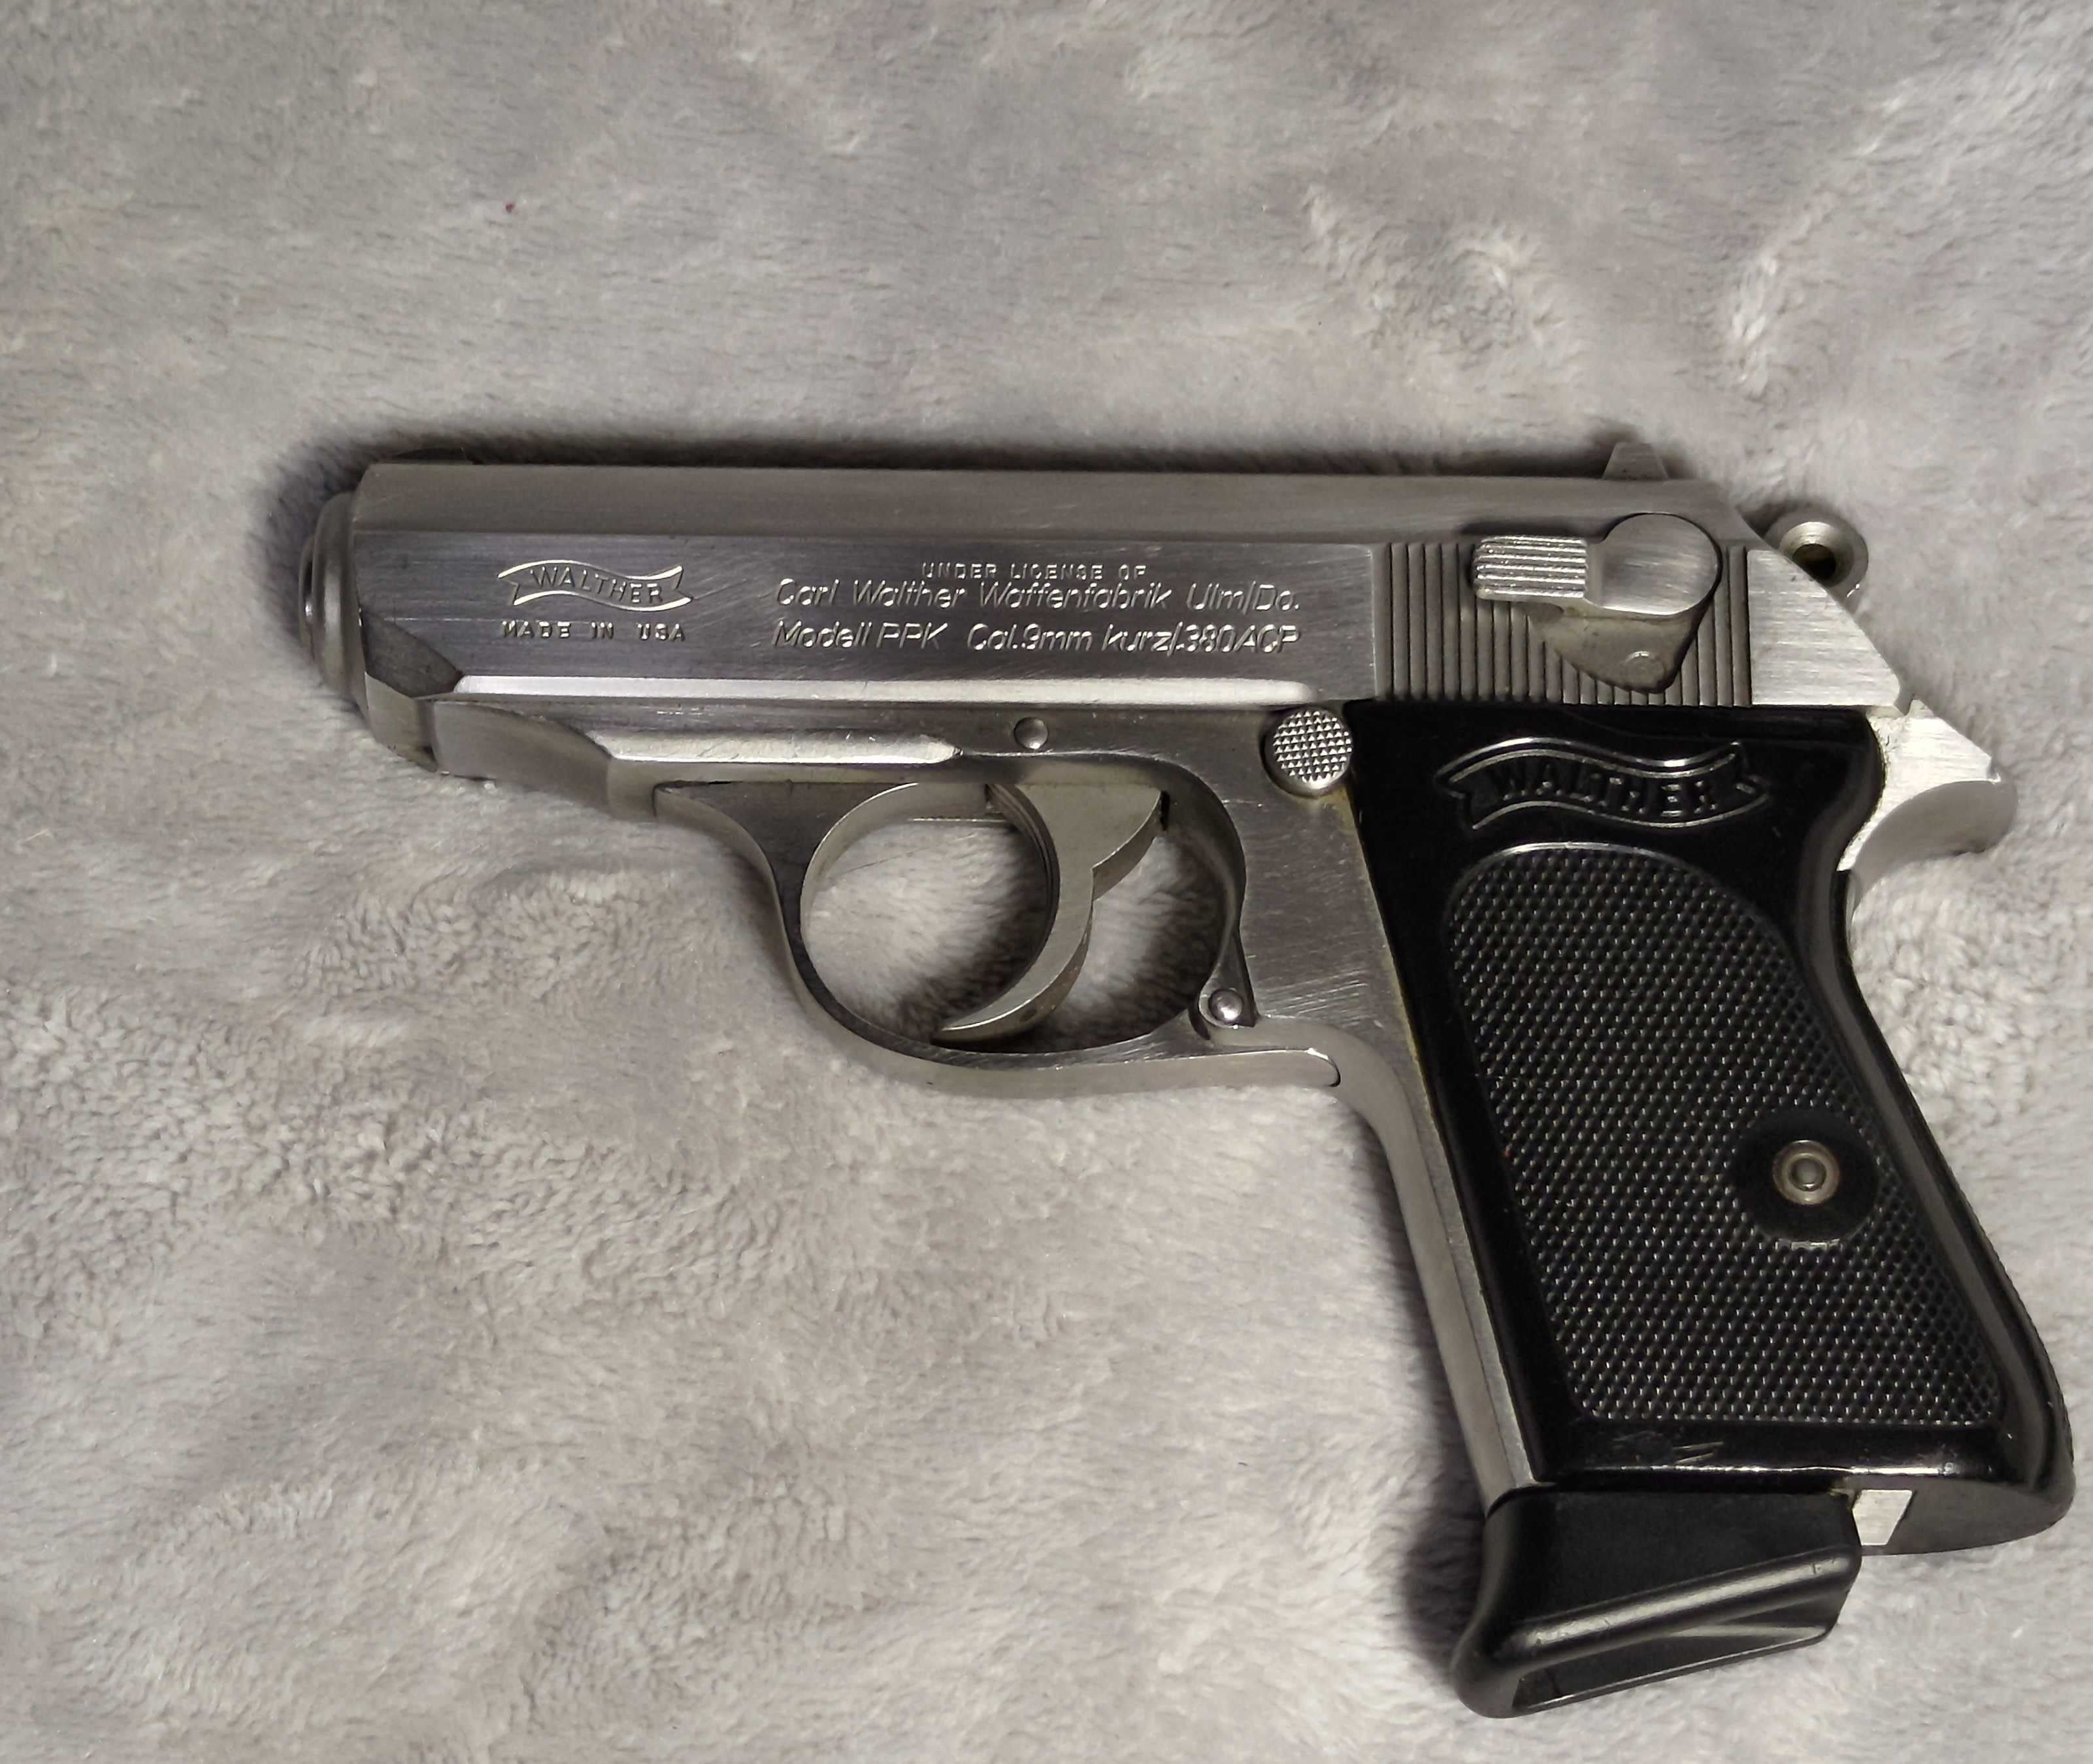 Closeup of the Walther PPK in .380 ACP